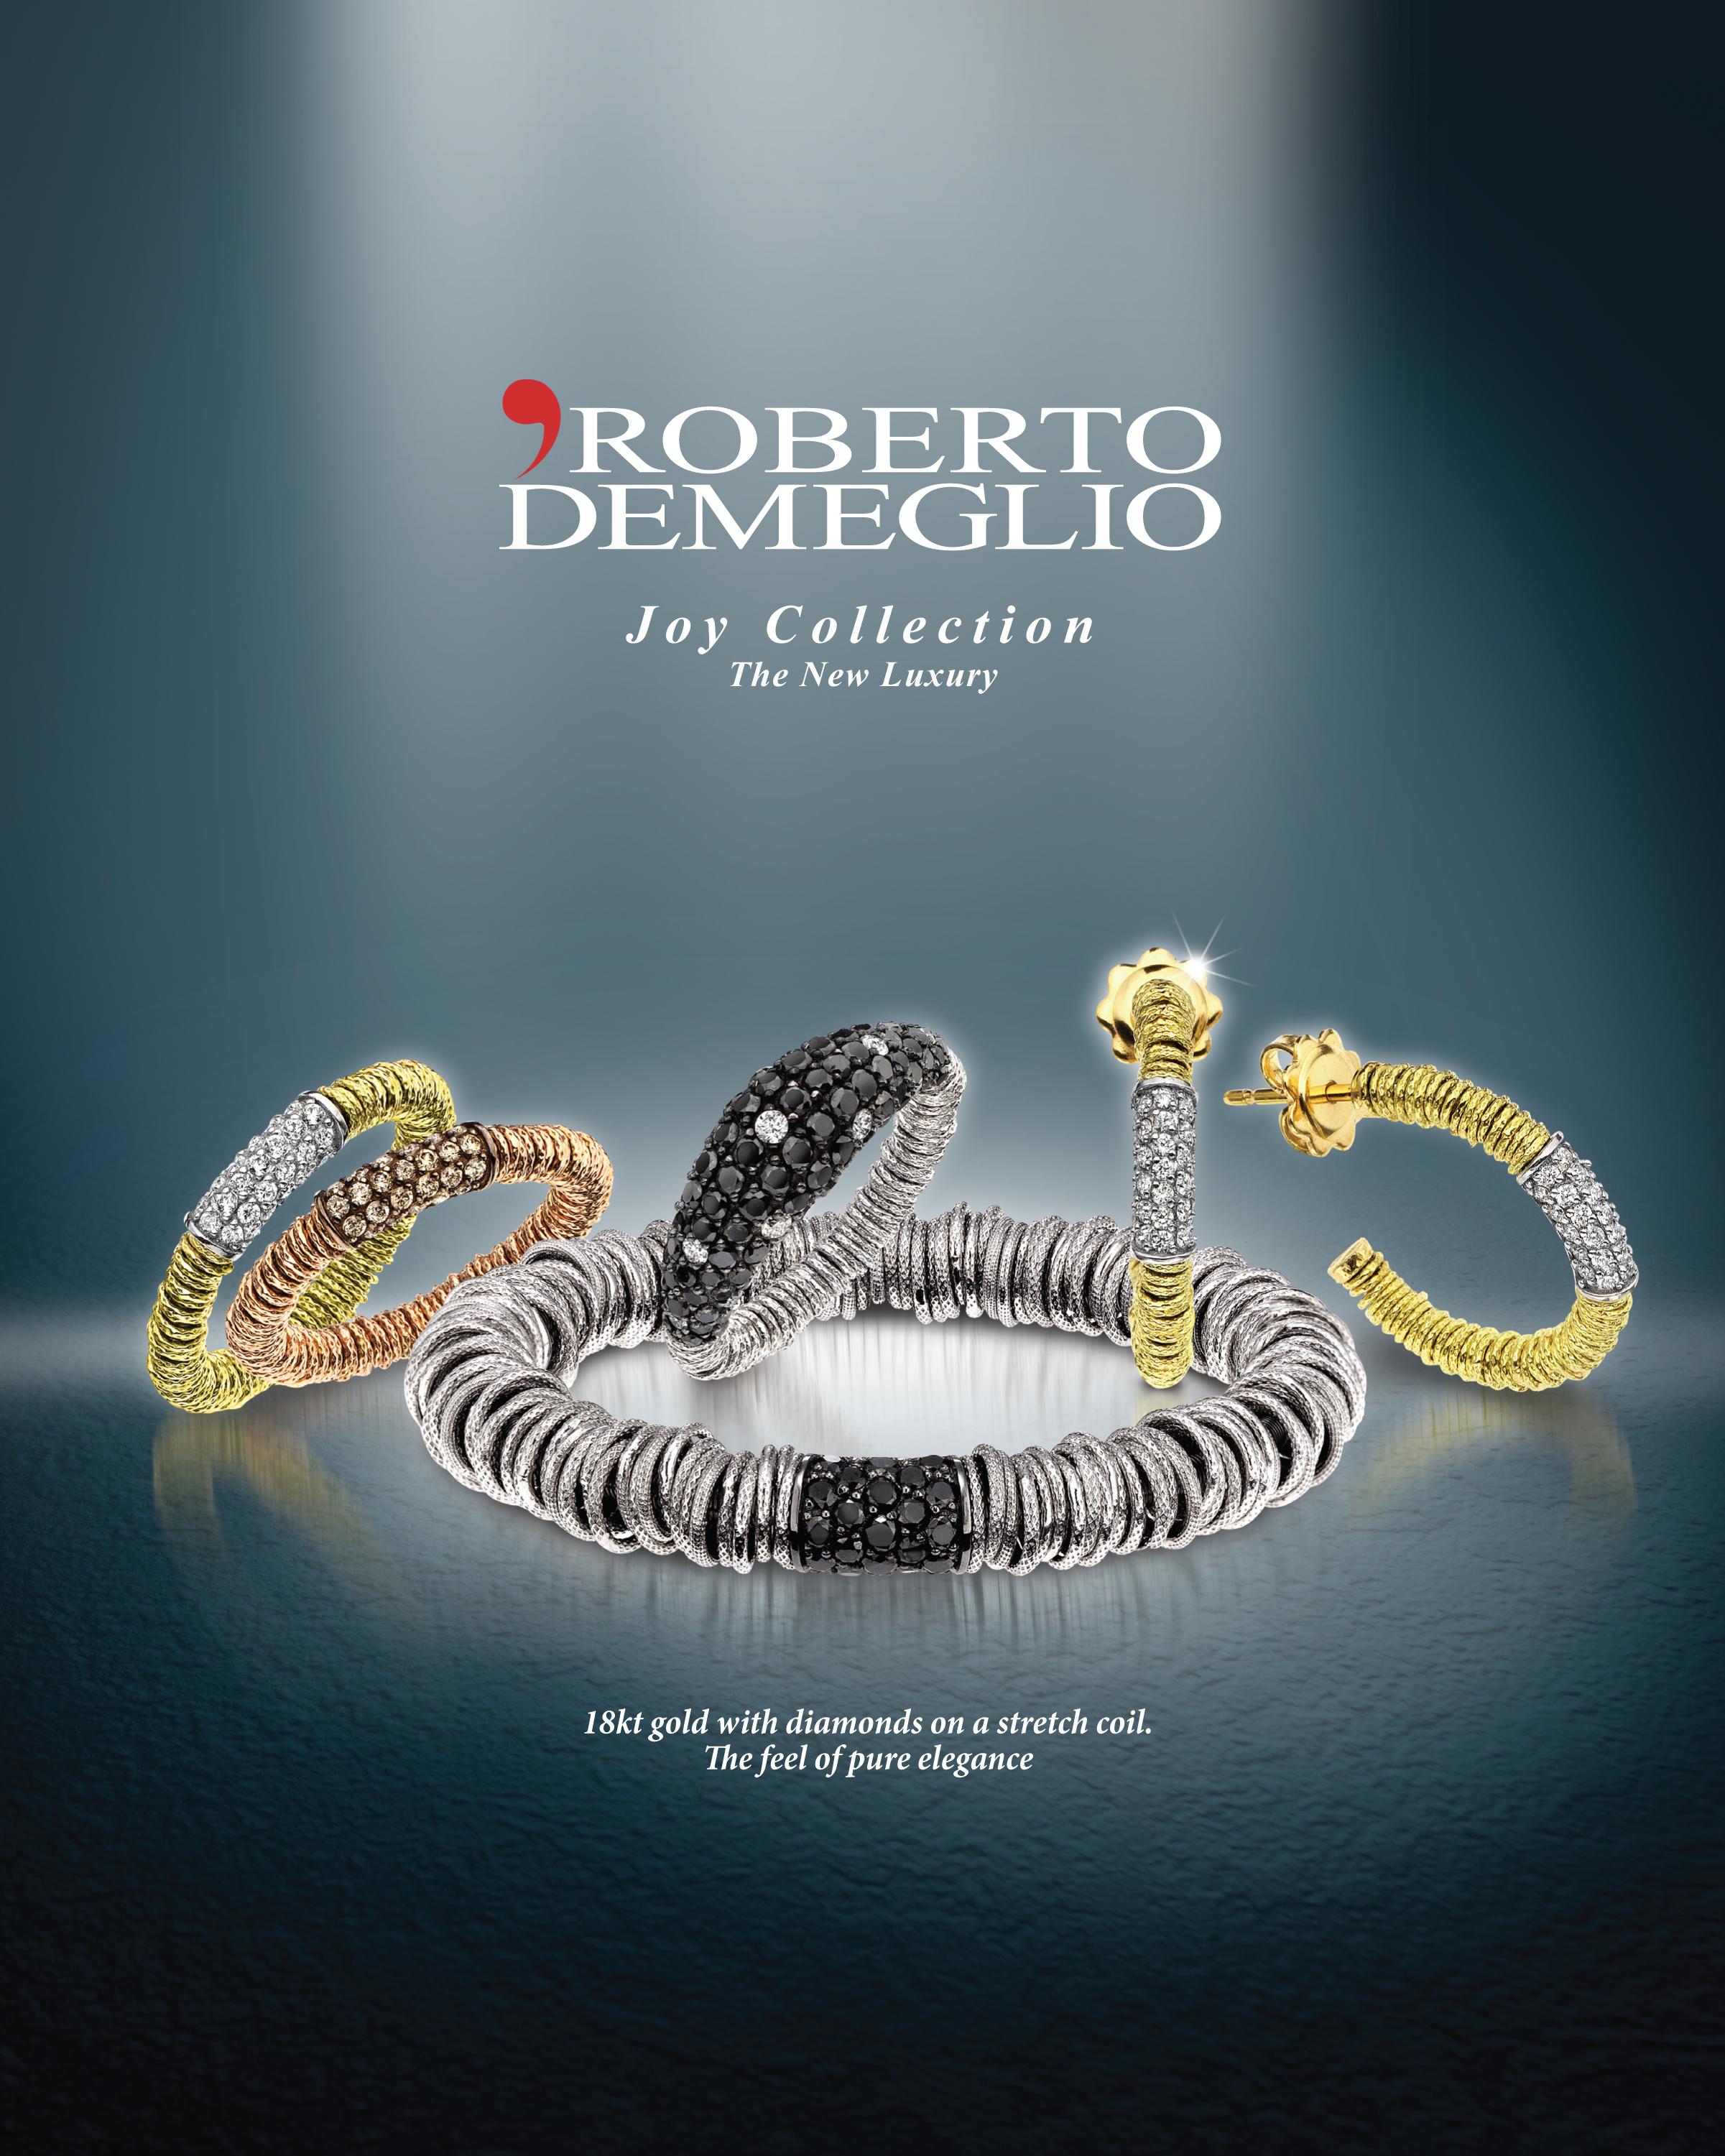 18 karat rose gold stretch bracelet from designer Roberto Demeglio's Joy Collection. The bracelet features hundreds of textured rose gold rings that spin freely around the center spring and chain. There is one rondelle of pave set round cognac or